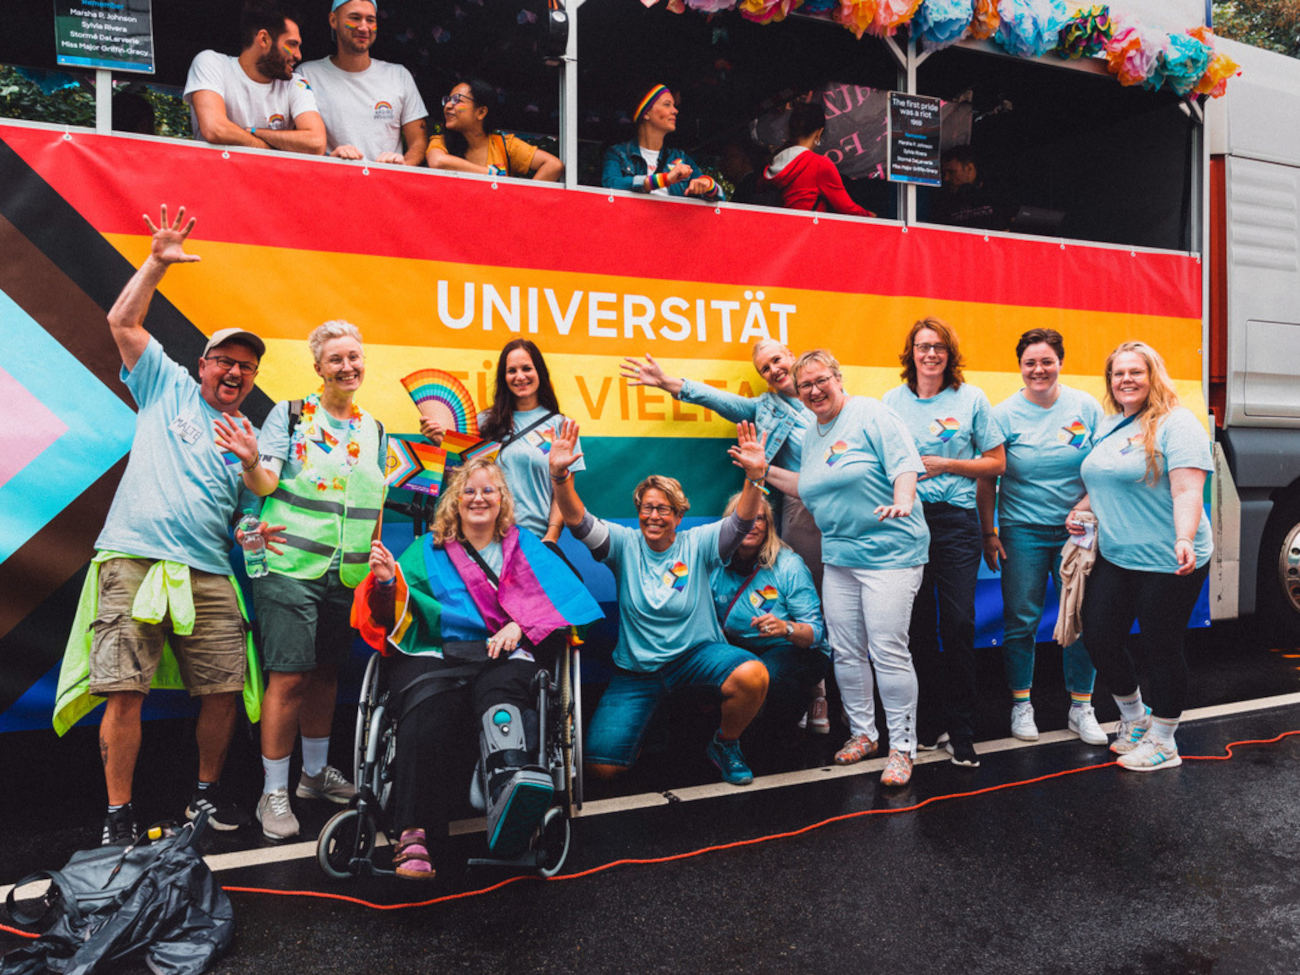 Members of the university pose in front of a university float at CSD 2023 in Bremen